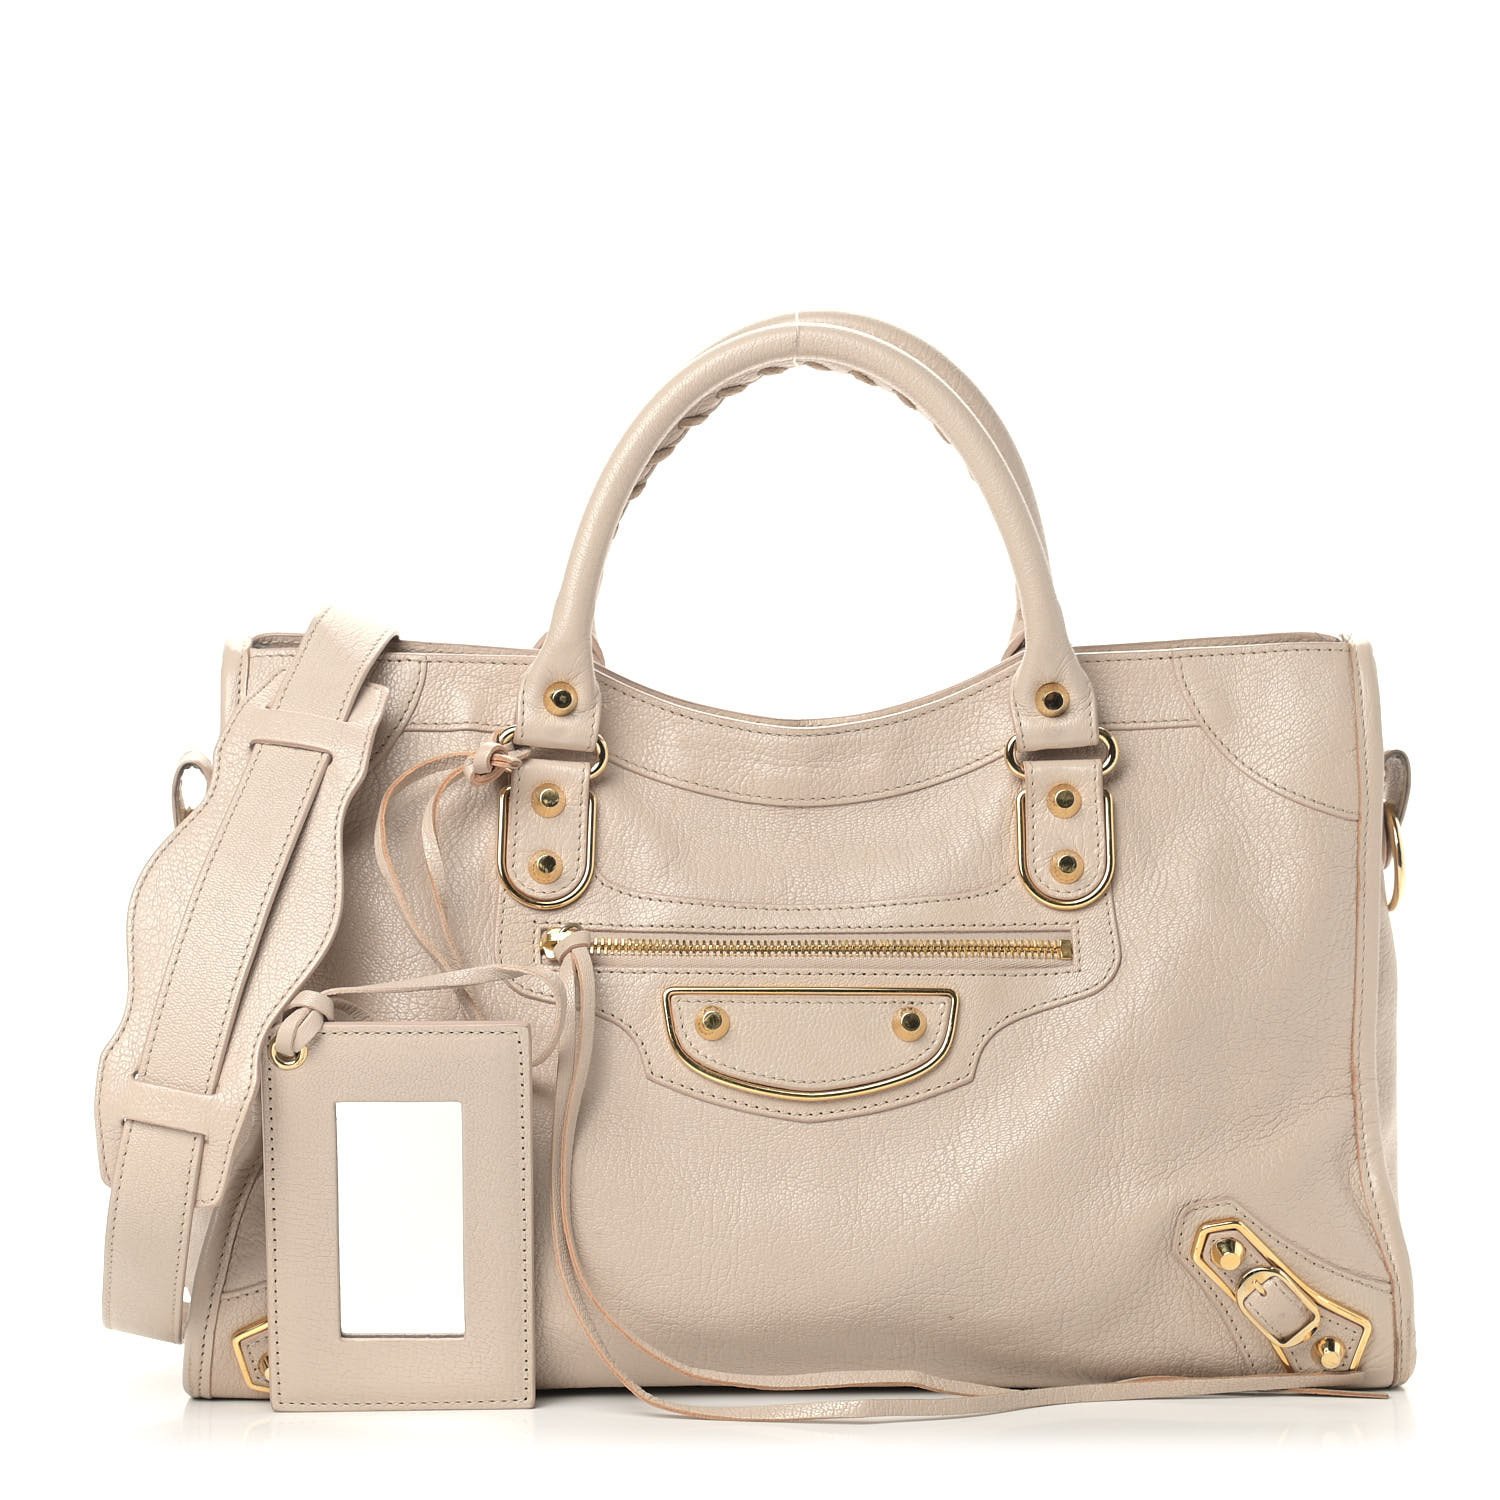 The Top 10 Most Popular Designer Bags for Under $1000 — Champagne